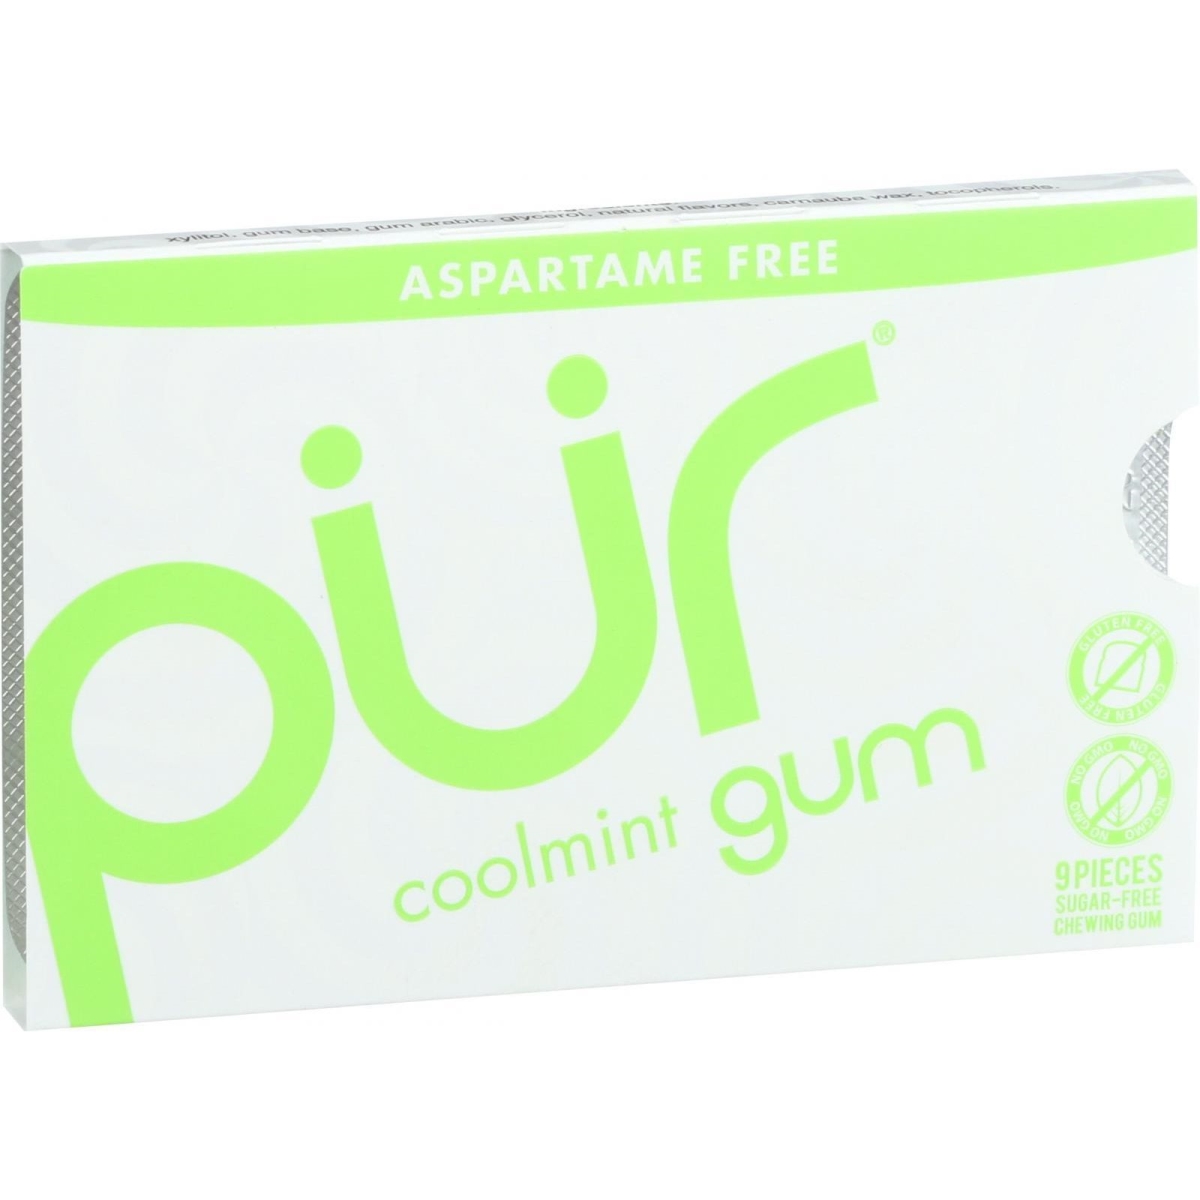 1608470 12.6 G Coolmint Chewing Gum - Aspartame Free - 9 Pieces, Case Of 12